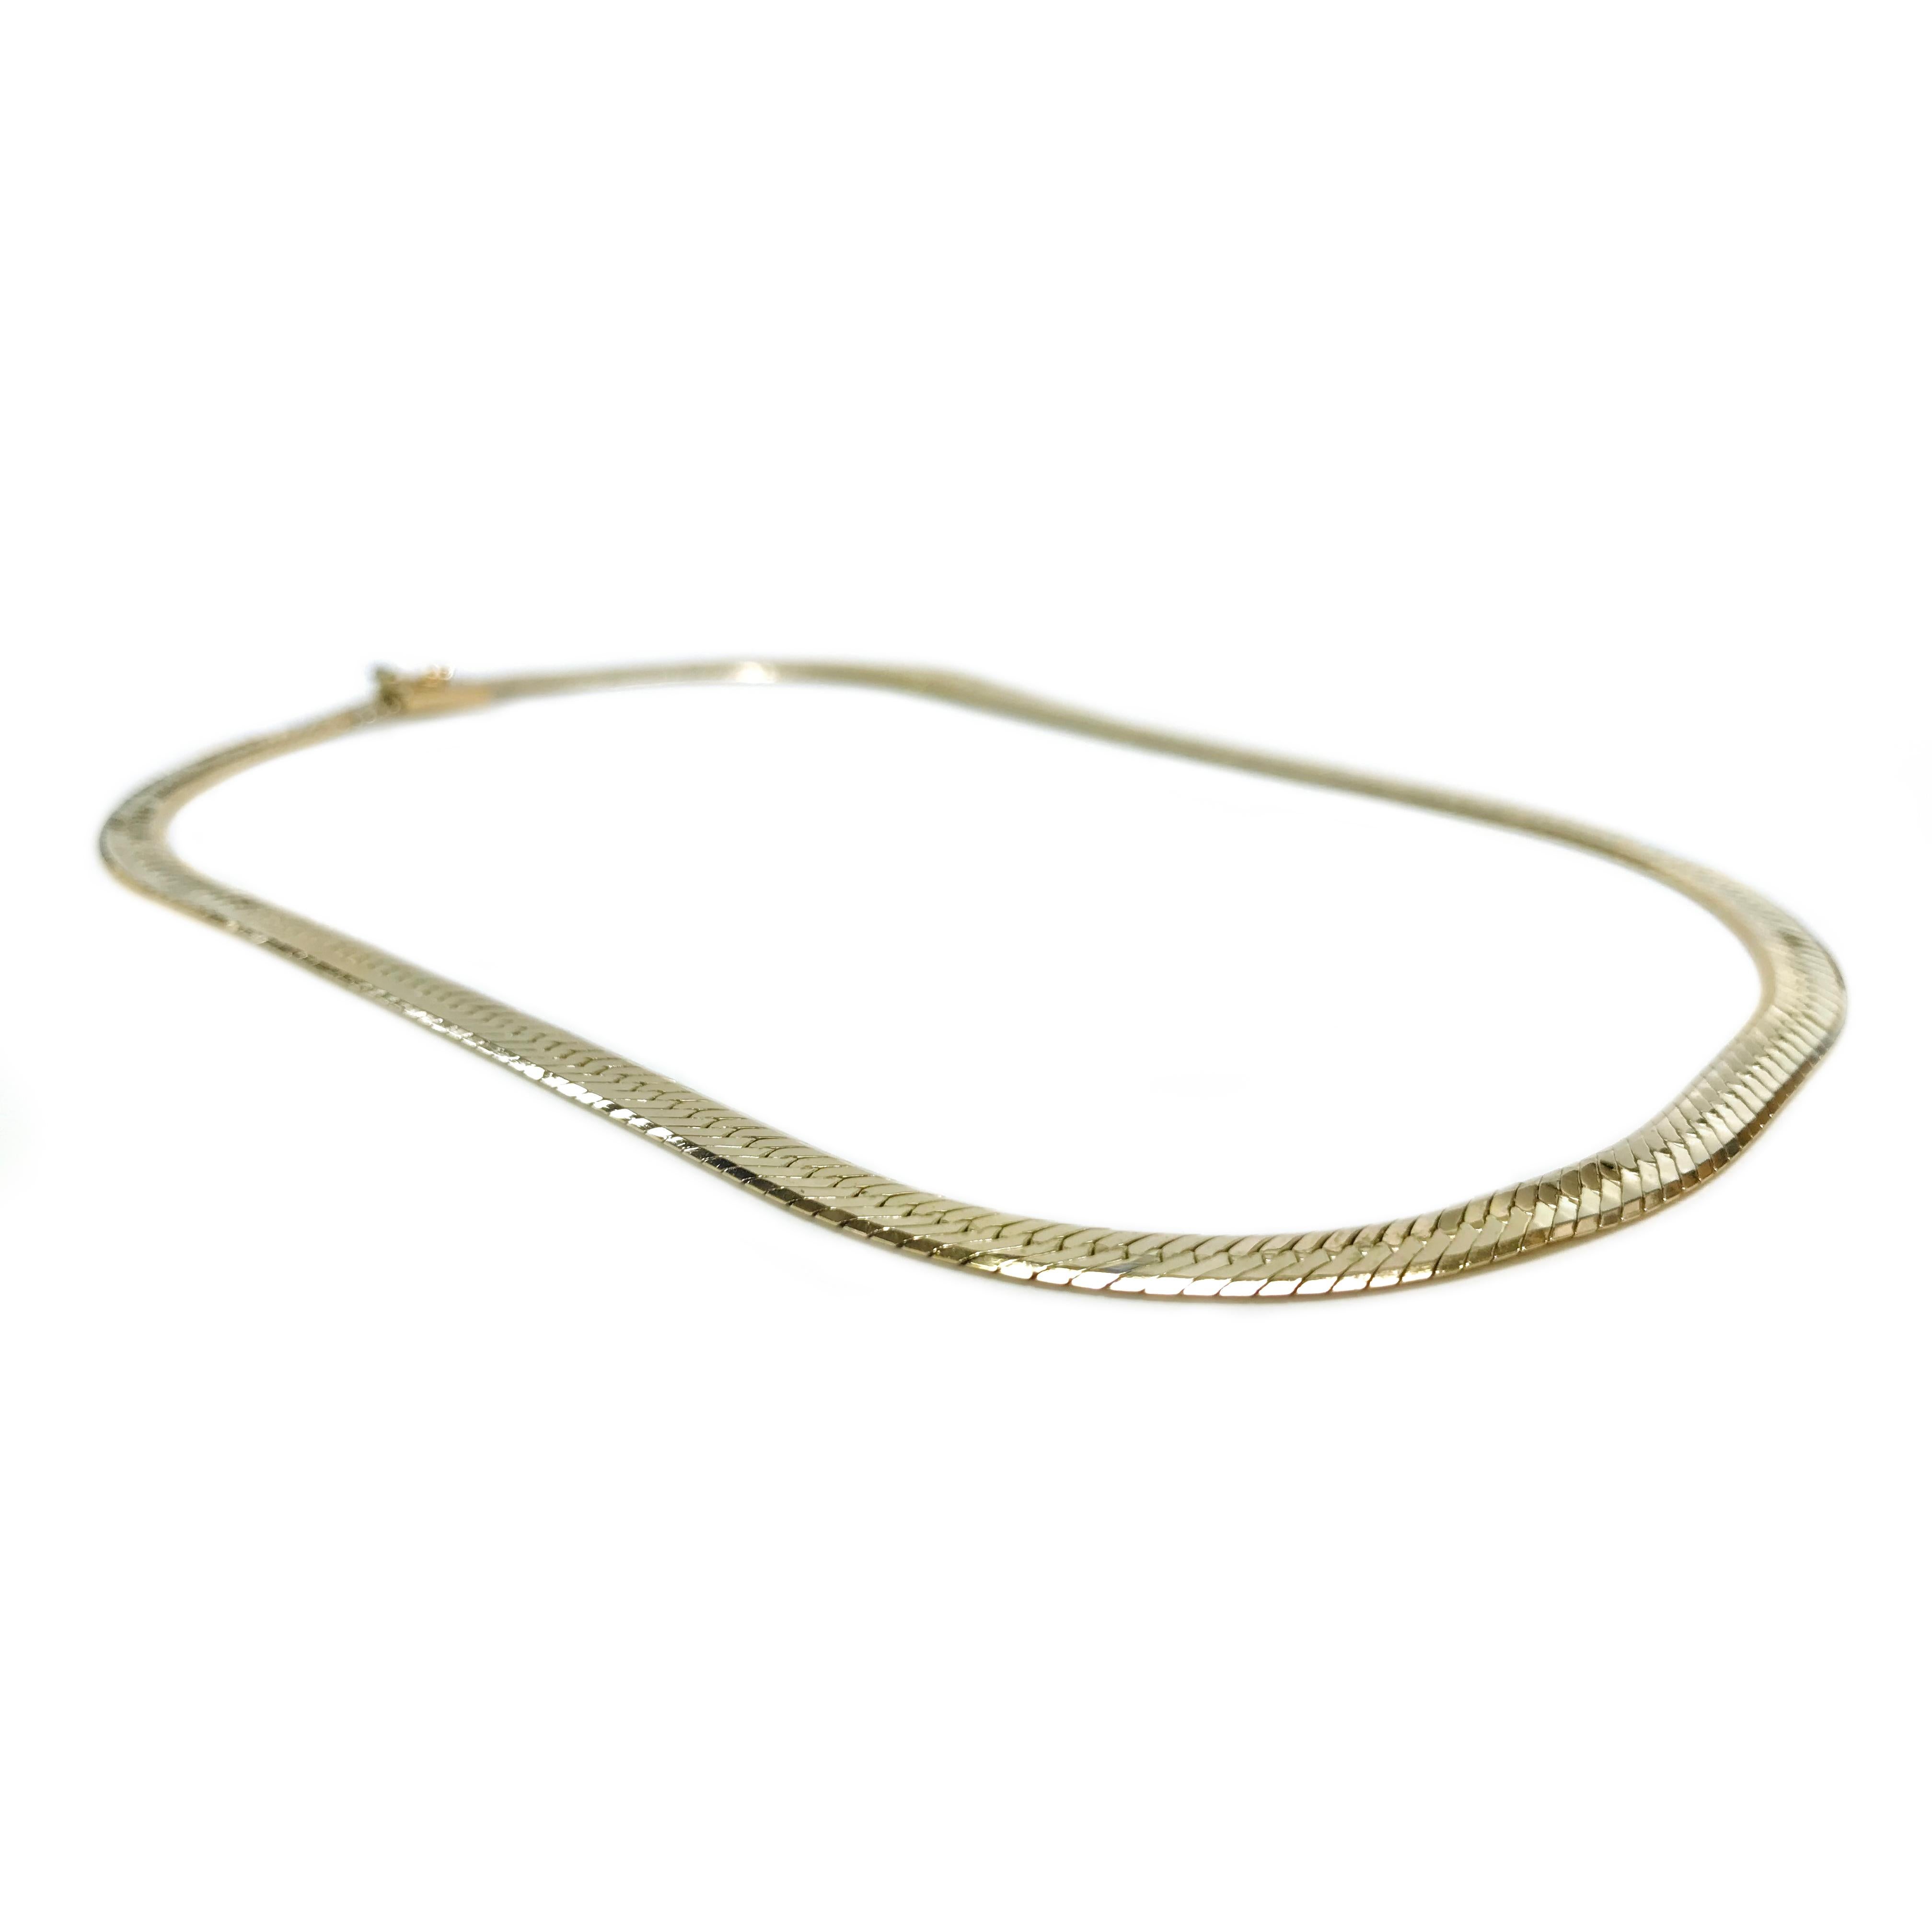 14 Karat Herringbone Necklace. The necklace is 0.53mm thick, 6.2mm wide and 17